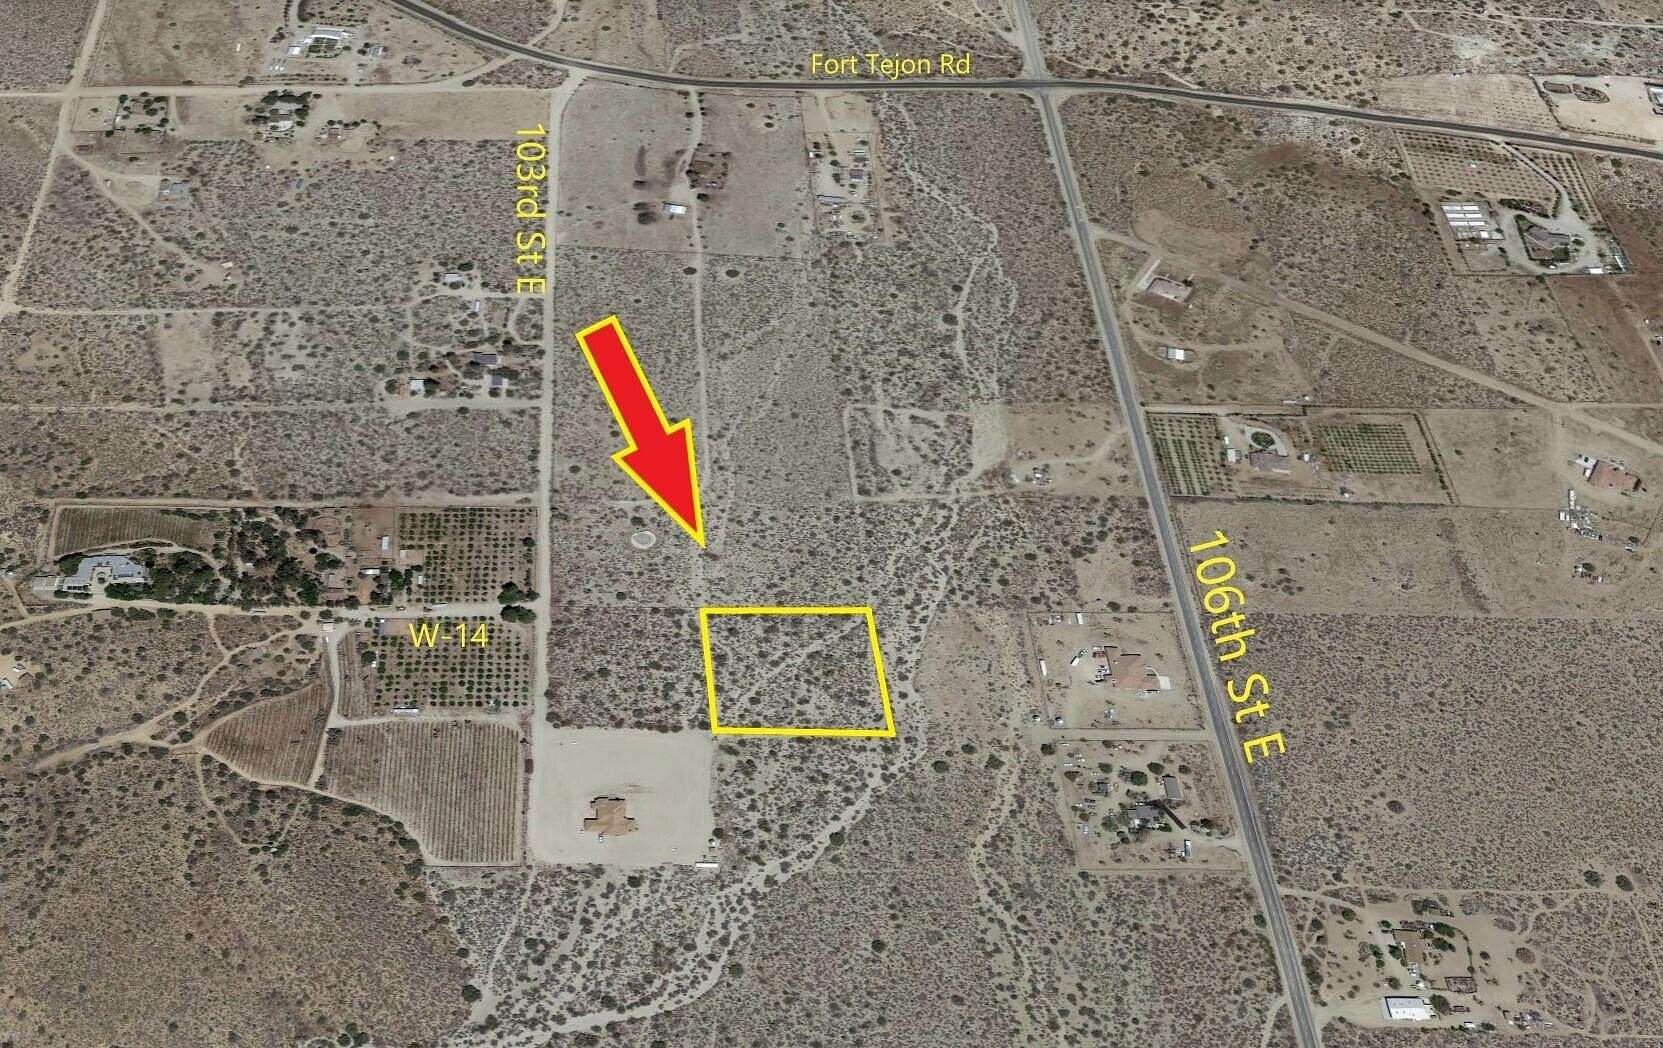 2.5 Acres of Residential Land for Sale in Pearblossom, California